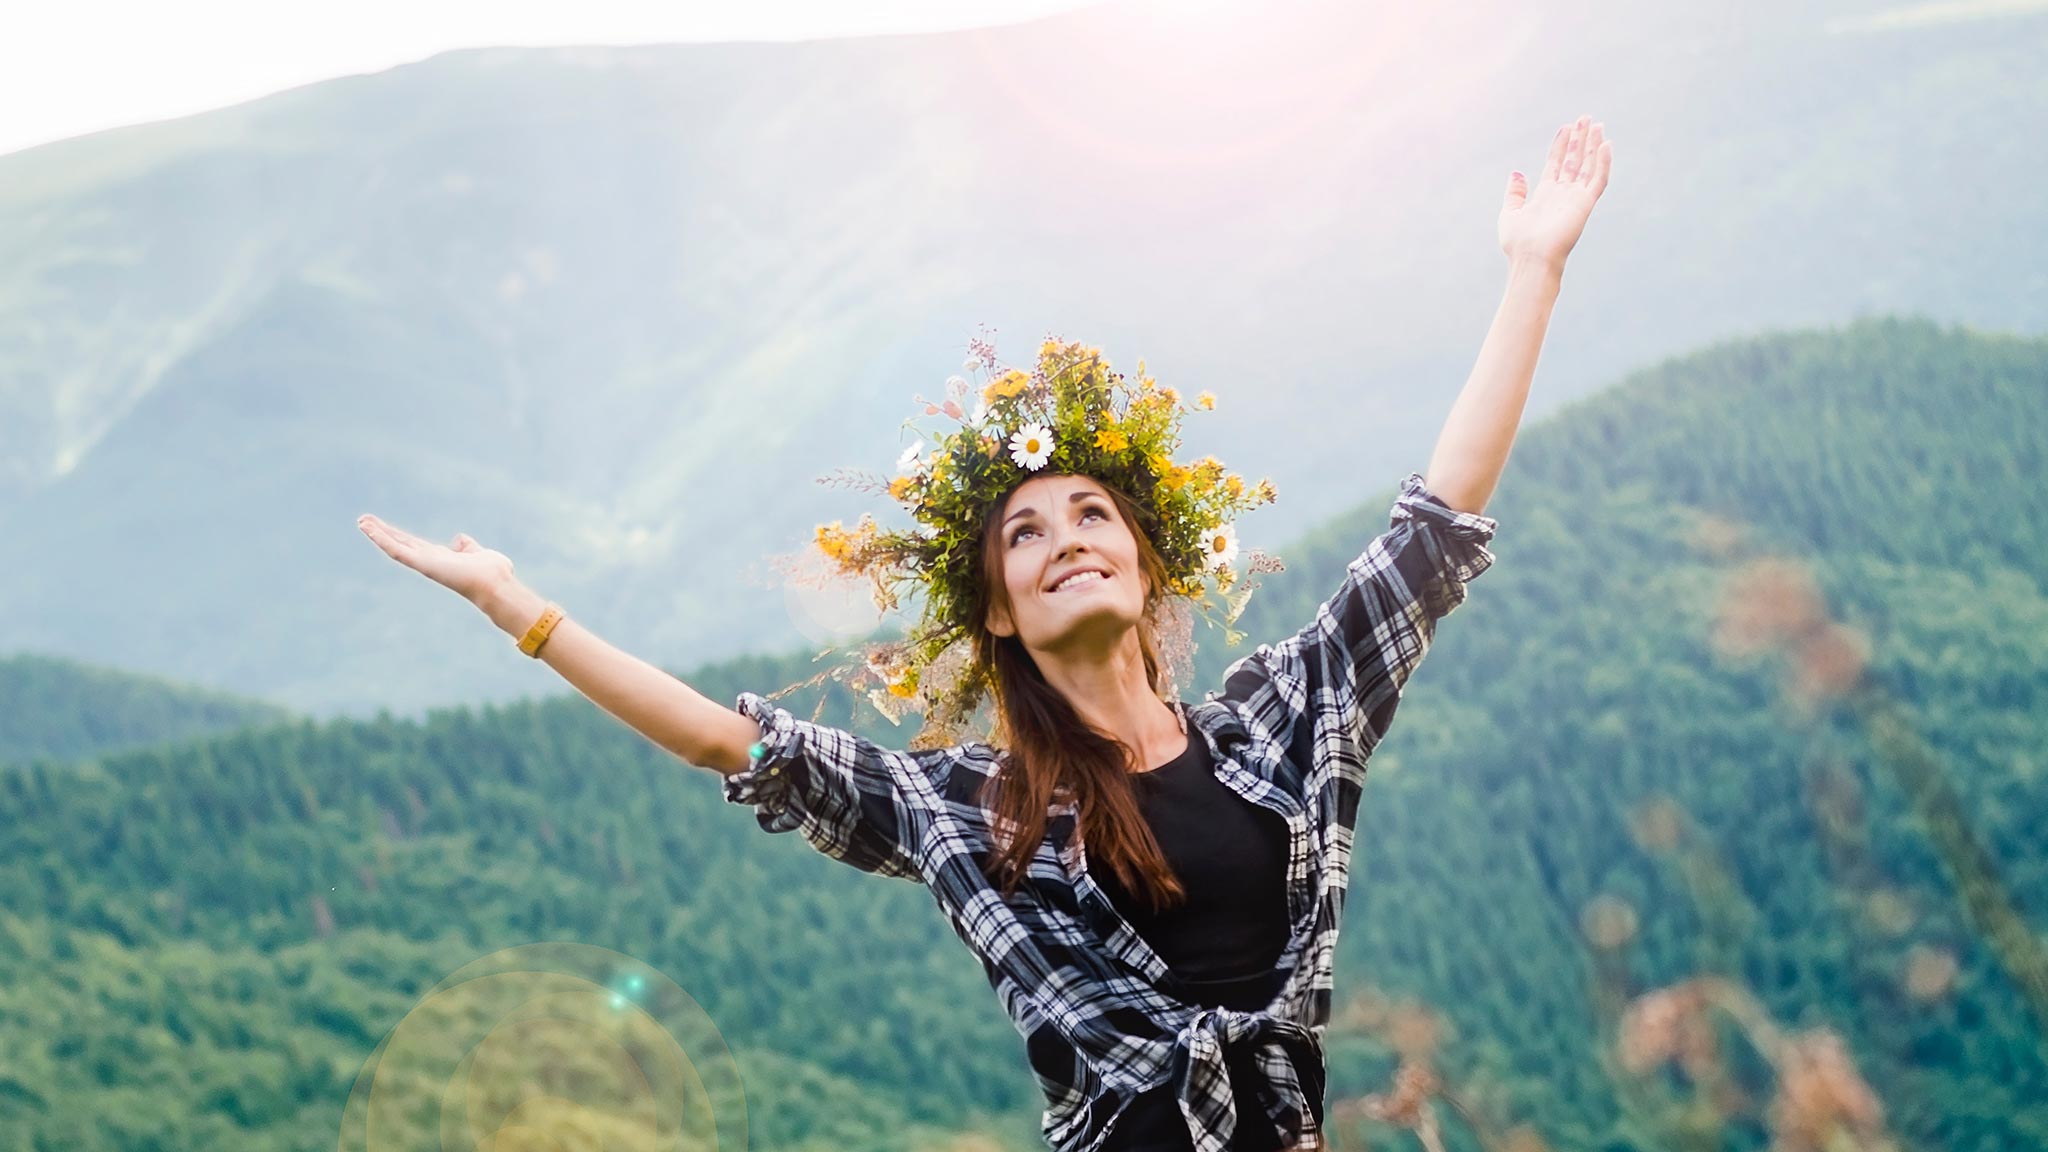 Photograph Of Woman Wearing Flower Headdress, Hands Raised Toward The Sky In Happiness In Countryside Setting